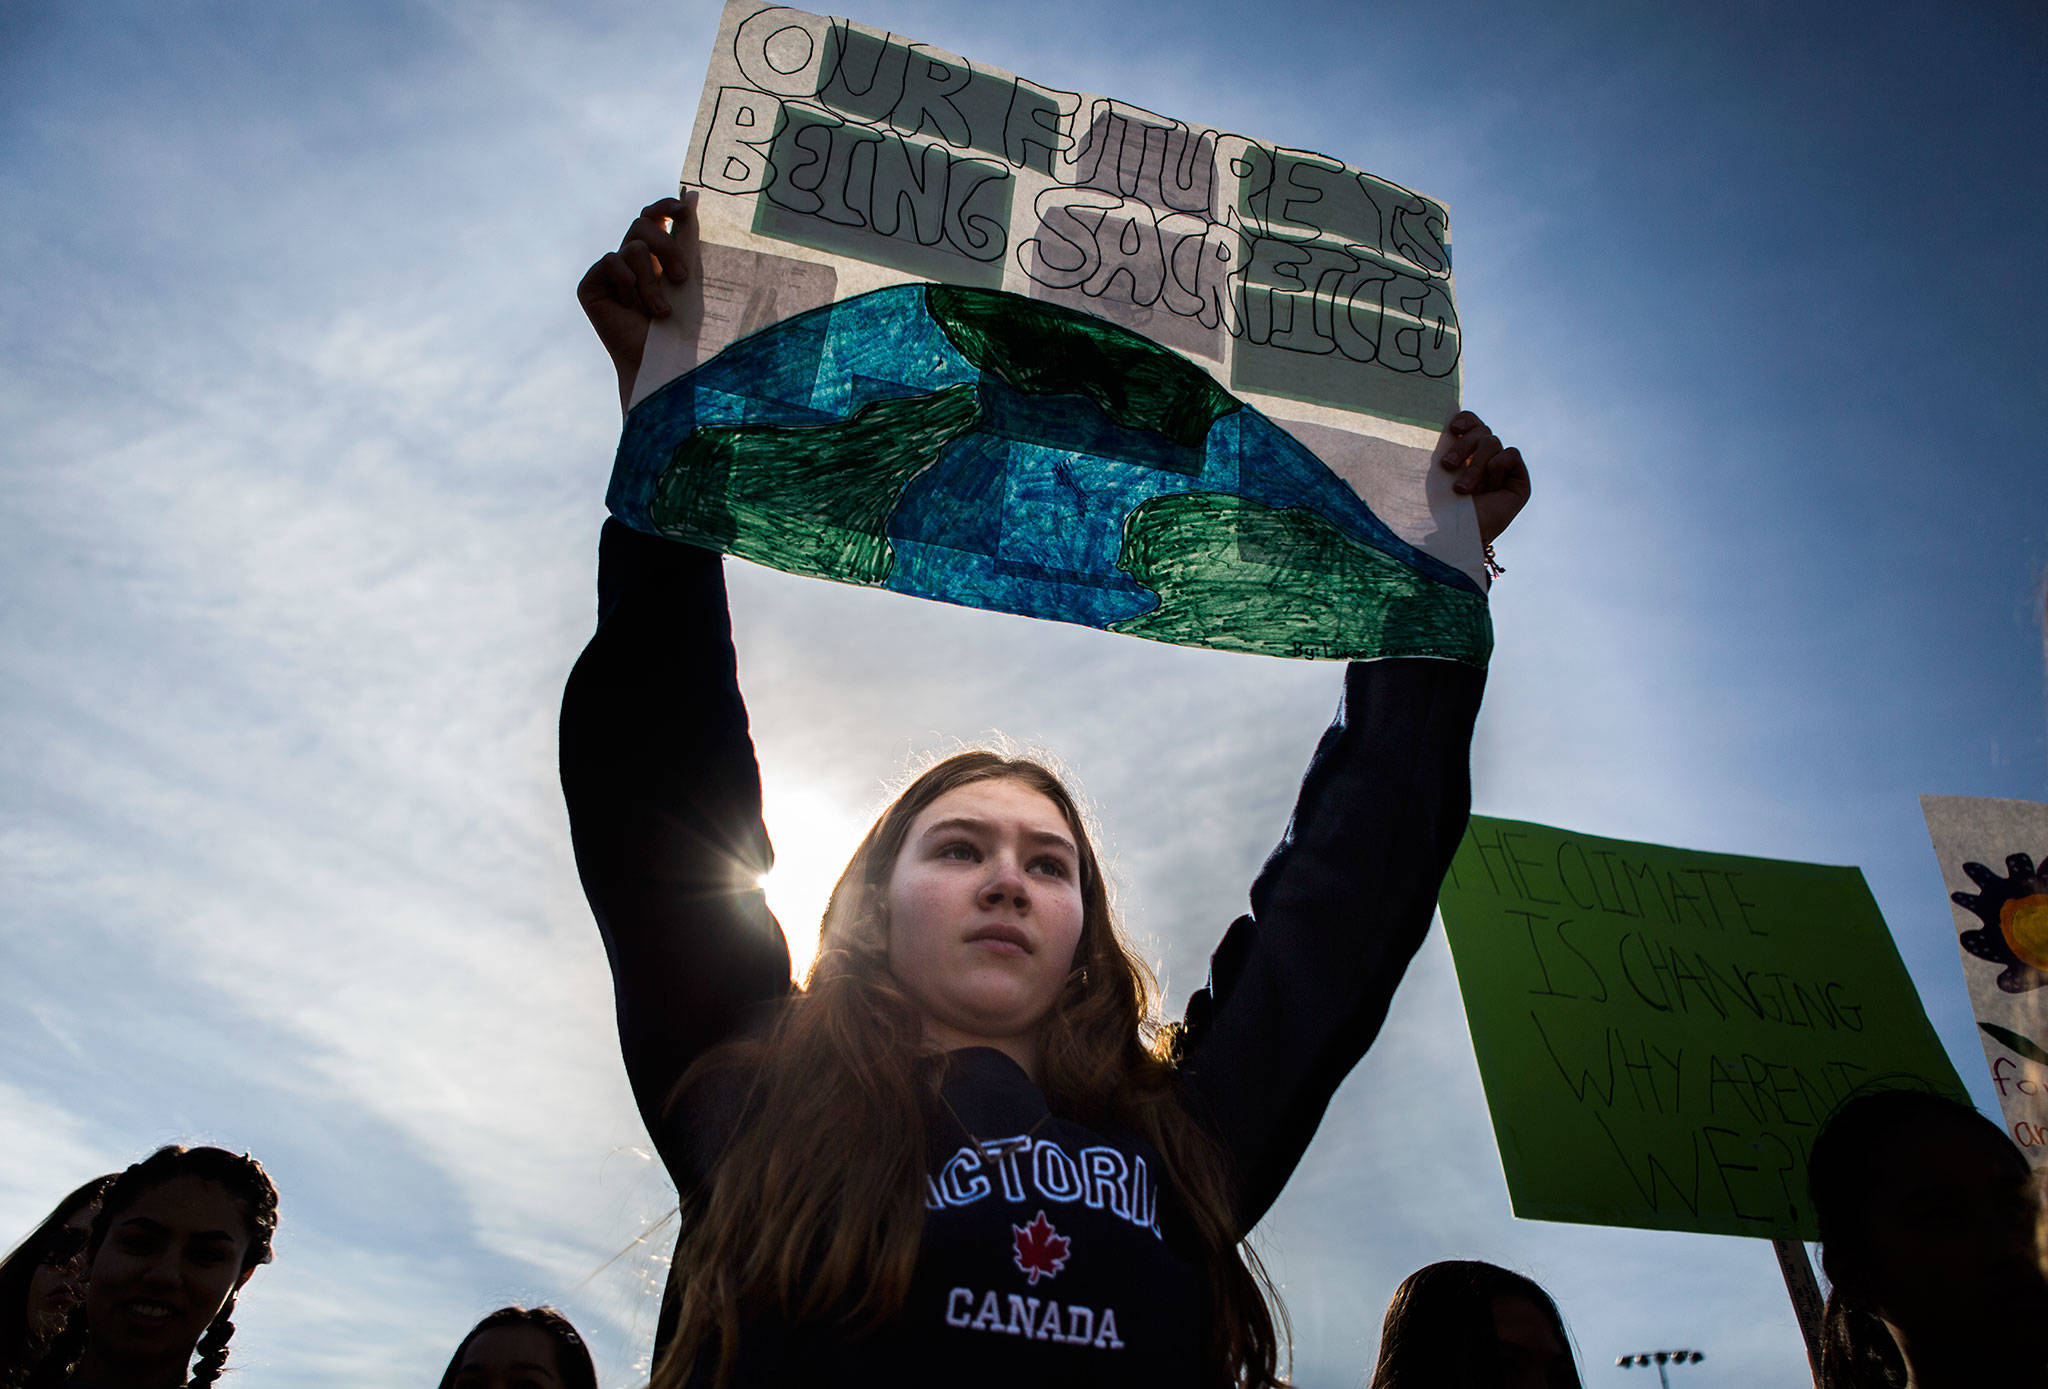 Maeve McArdle, 12, from TOPS (The Option Program at Seward) School, holds a sign that reads “Our future is being sacrificed” during the student-led Youth Climate Strike at Cal Anderson Park in Seattle on Friday. (Olivia Vanni / The Herald)